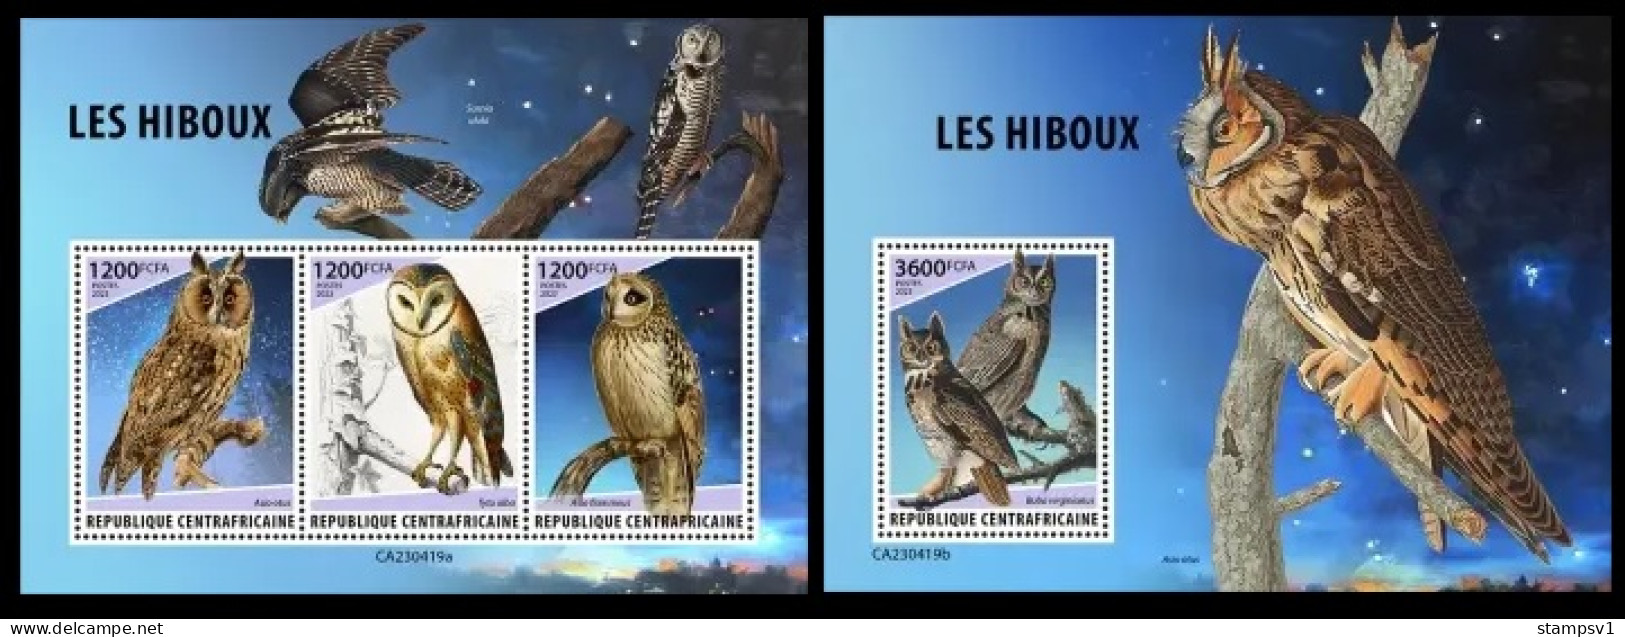 Central Africa 2023 Owls. (419) OFFICIAL ISSUE - Hiboux & Chouettes